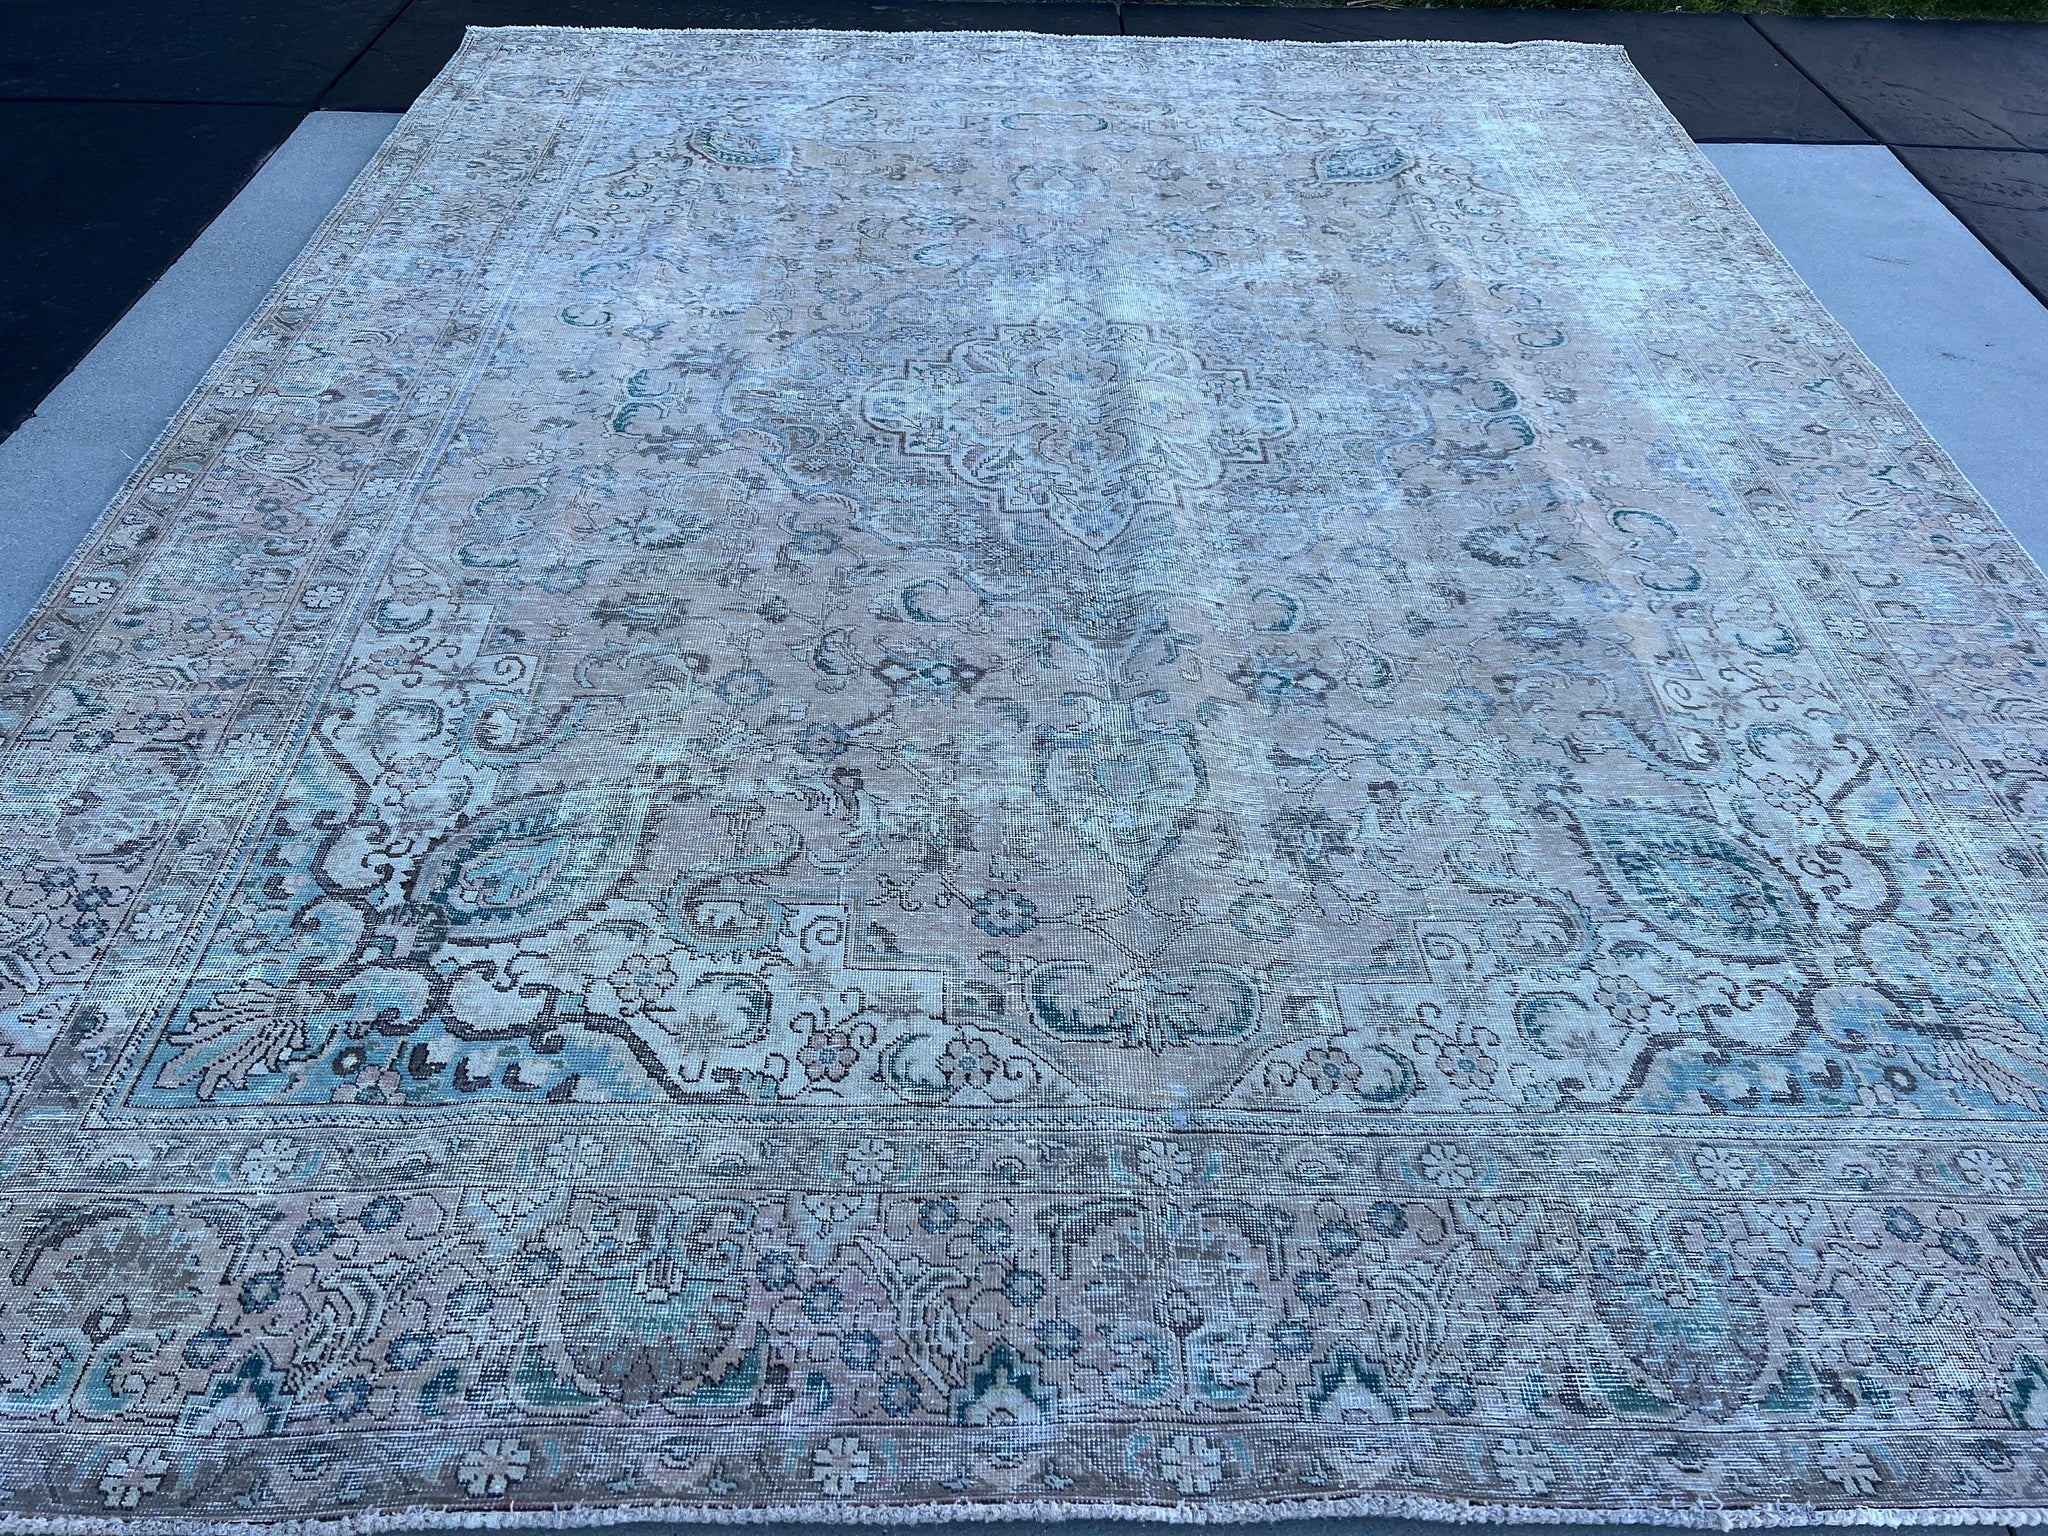 10x12 (305x400) Handmade Afghan Rug | Neutral Muted Grey Brown Cream Beige Teal | Wool Hand Knotted Turkish Oushak Persian Floral Hand Woven